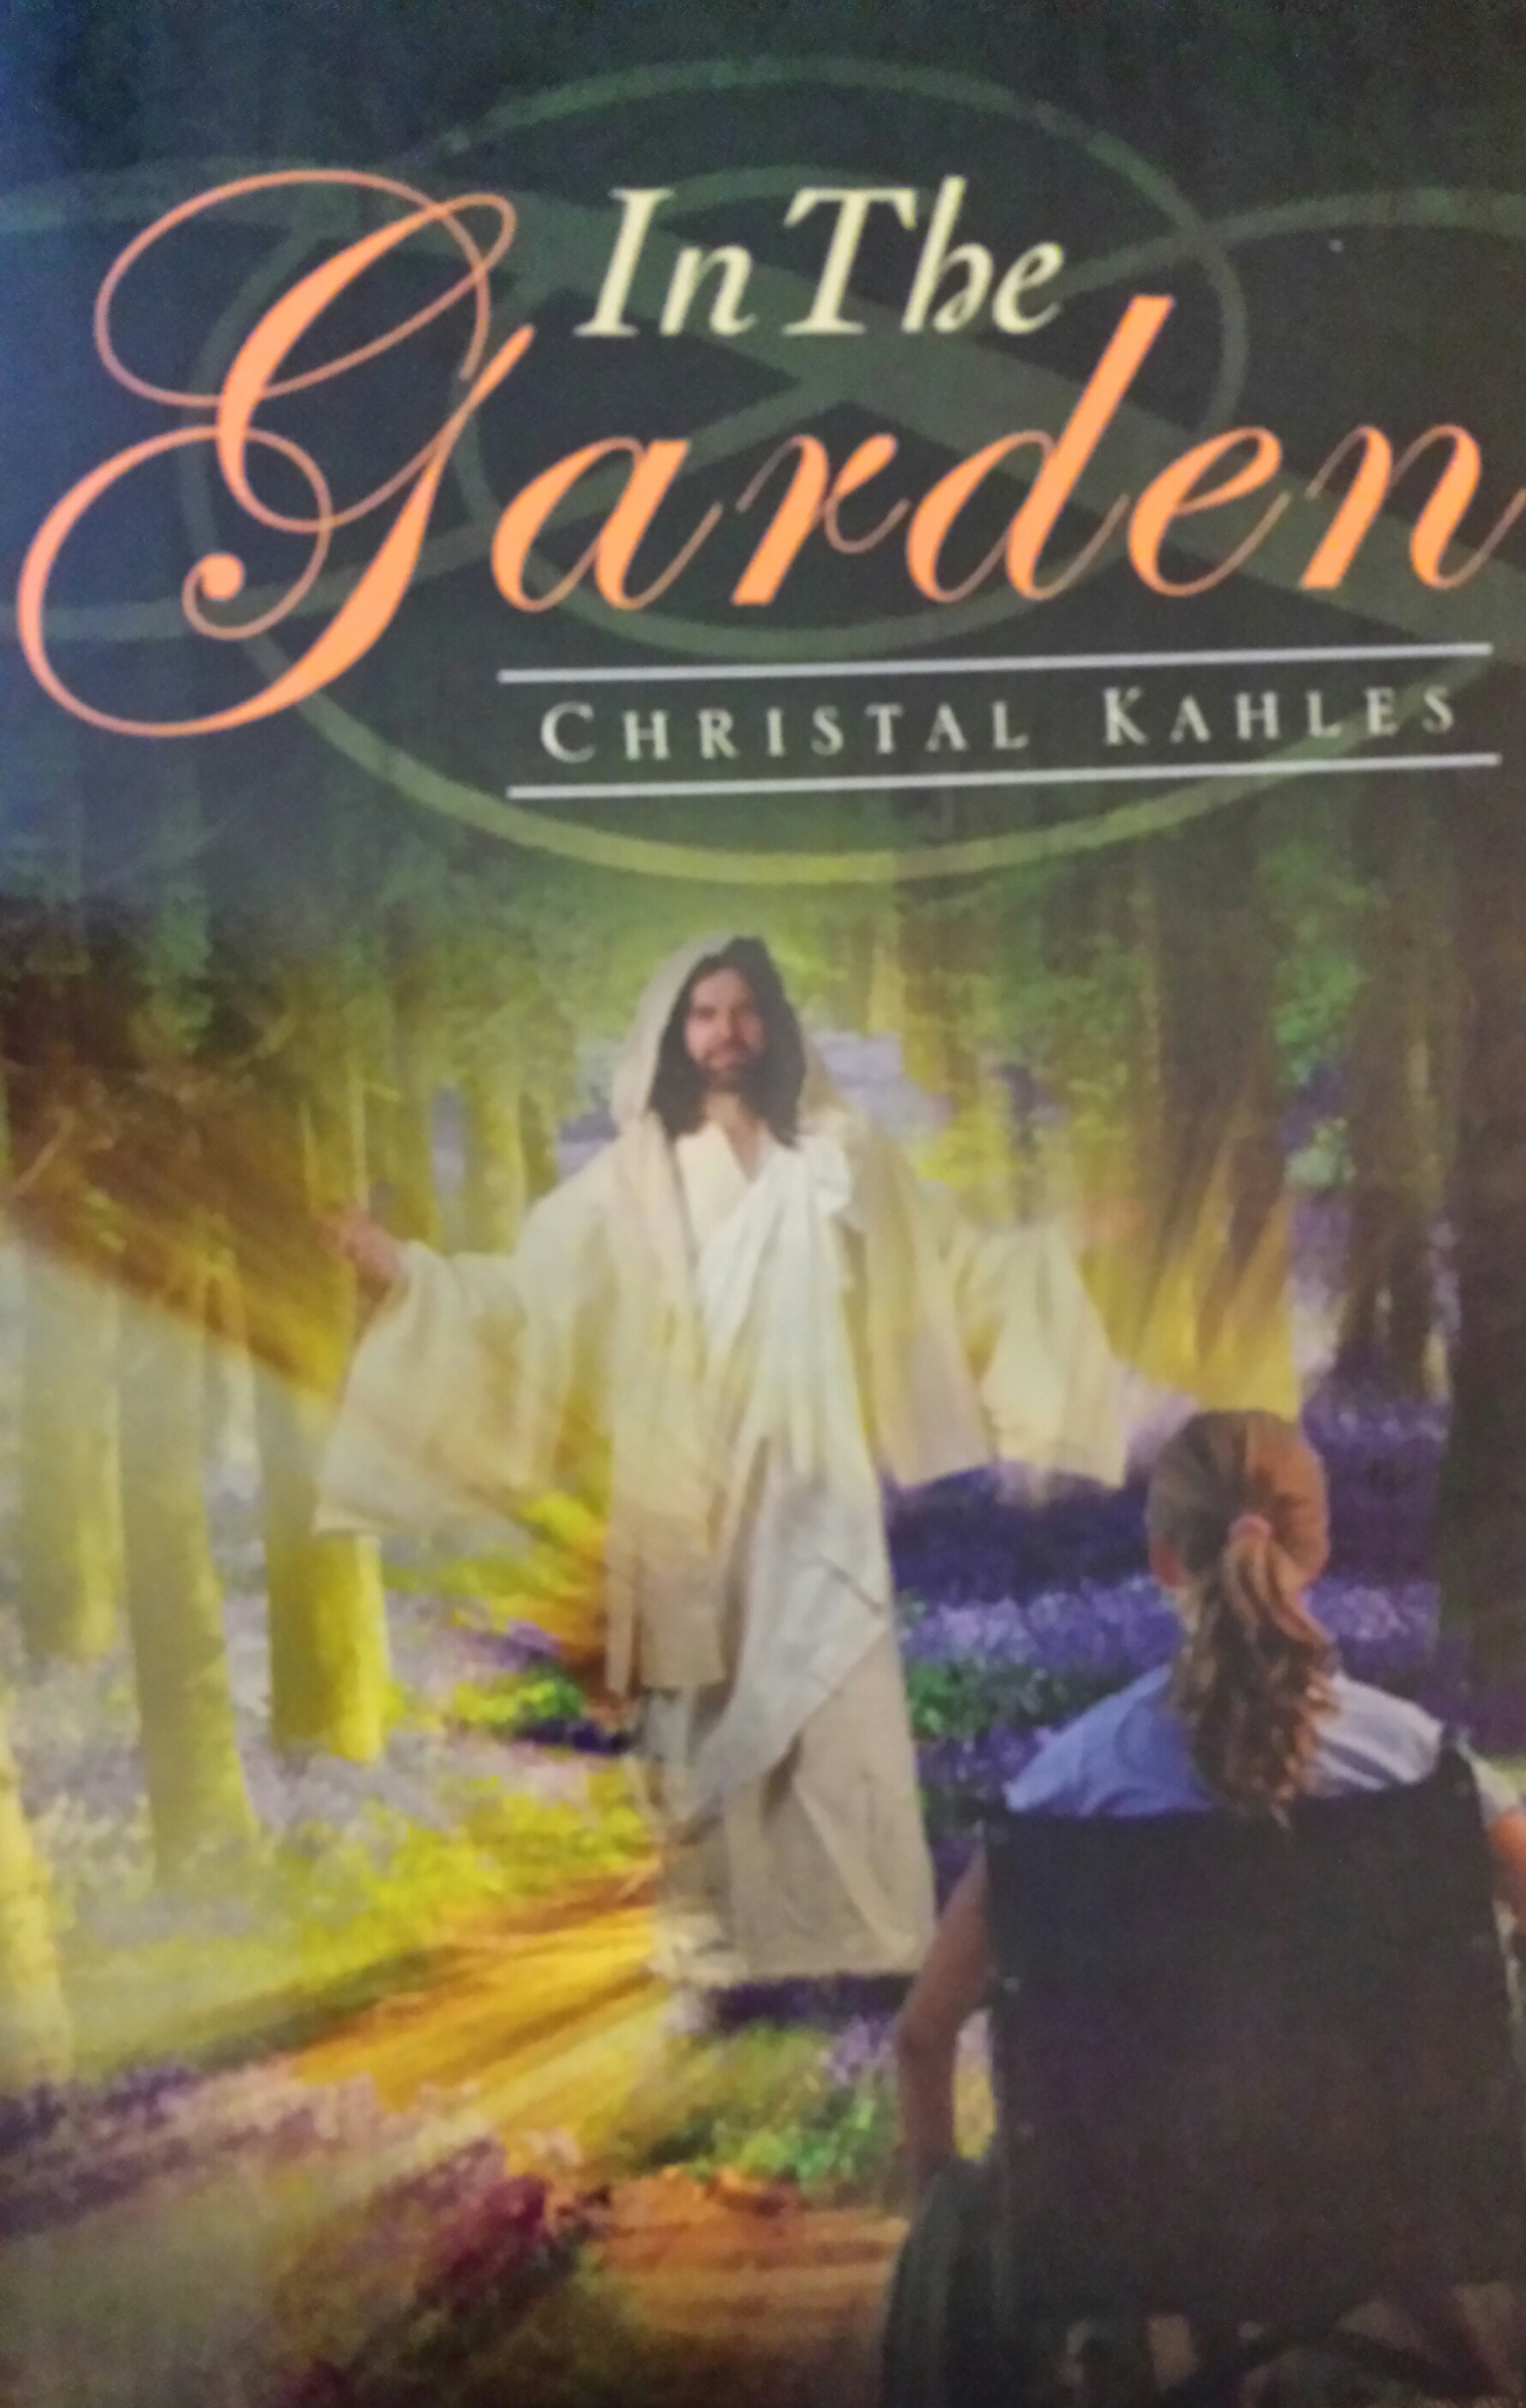 In The Garden...a novel written by Christal. Now a film in pre-production!